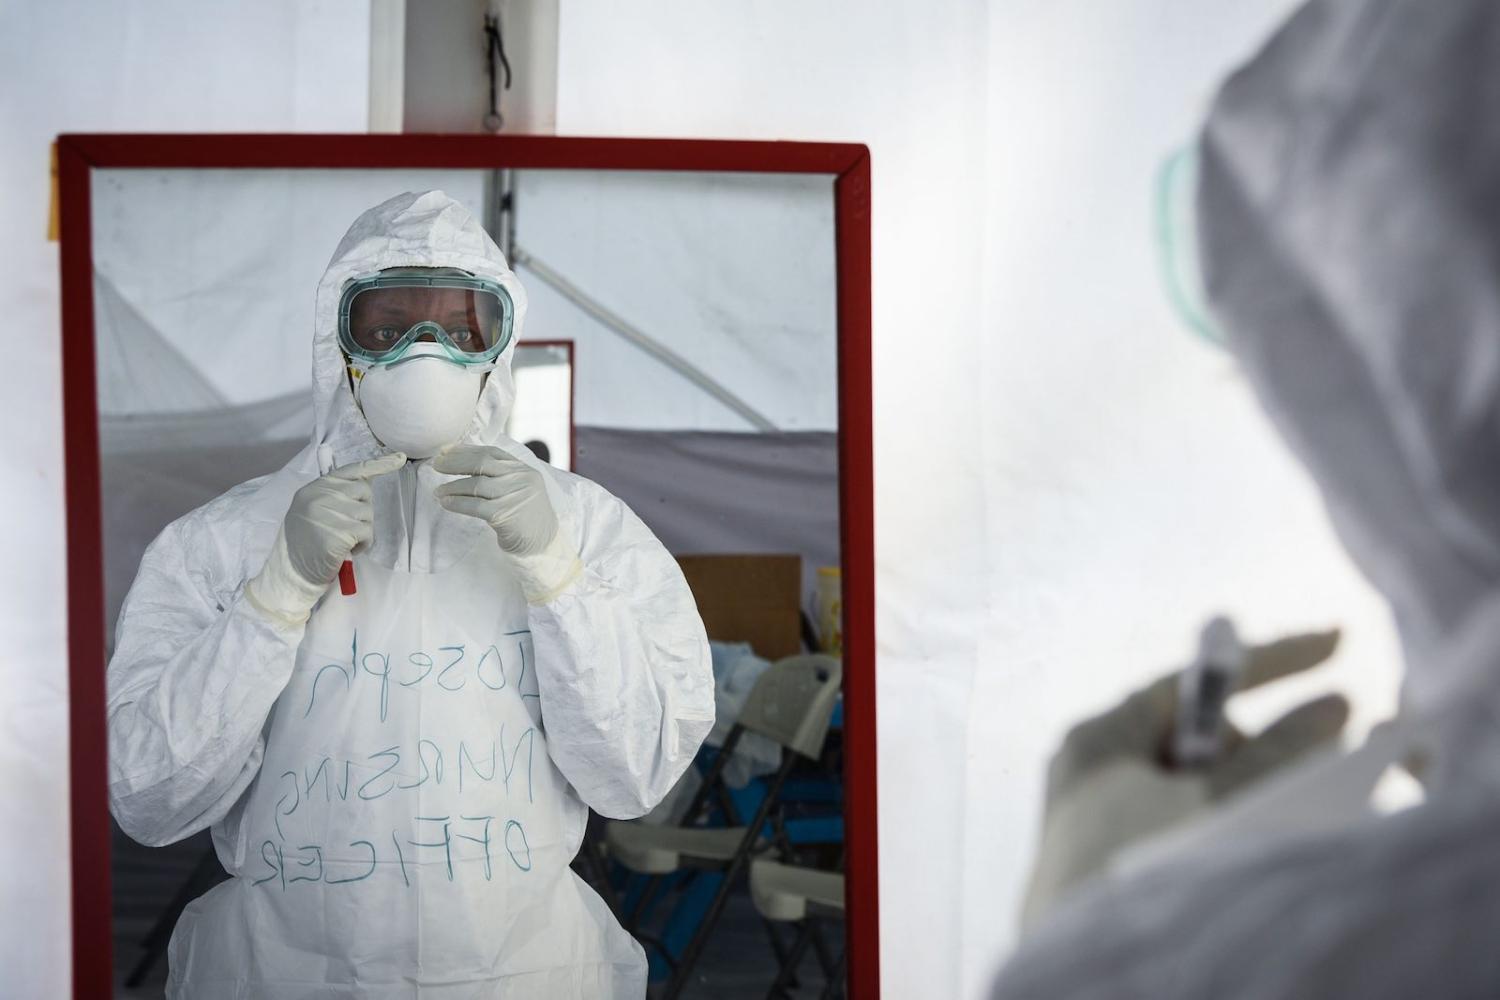 Personal Protective Equipment for treating victims of the outbreak (Photo: Isaac Kasamani via Getty)